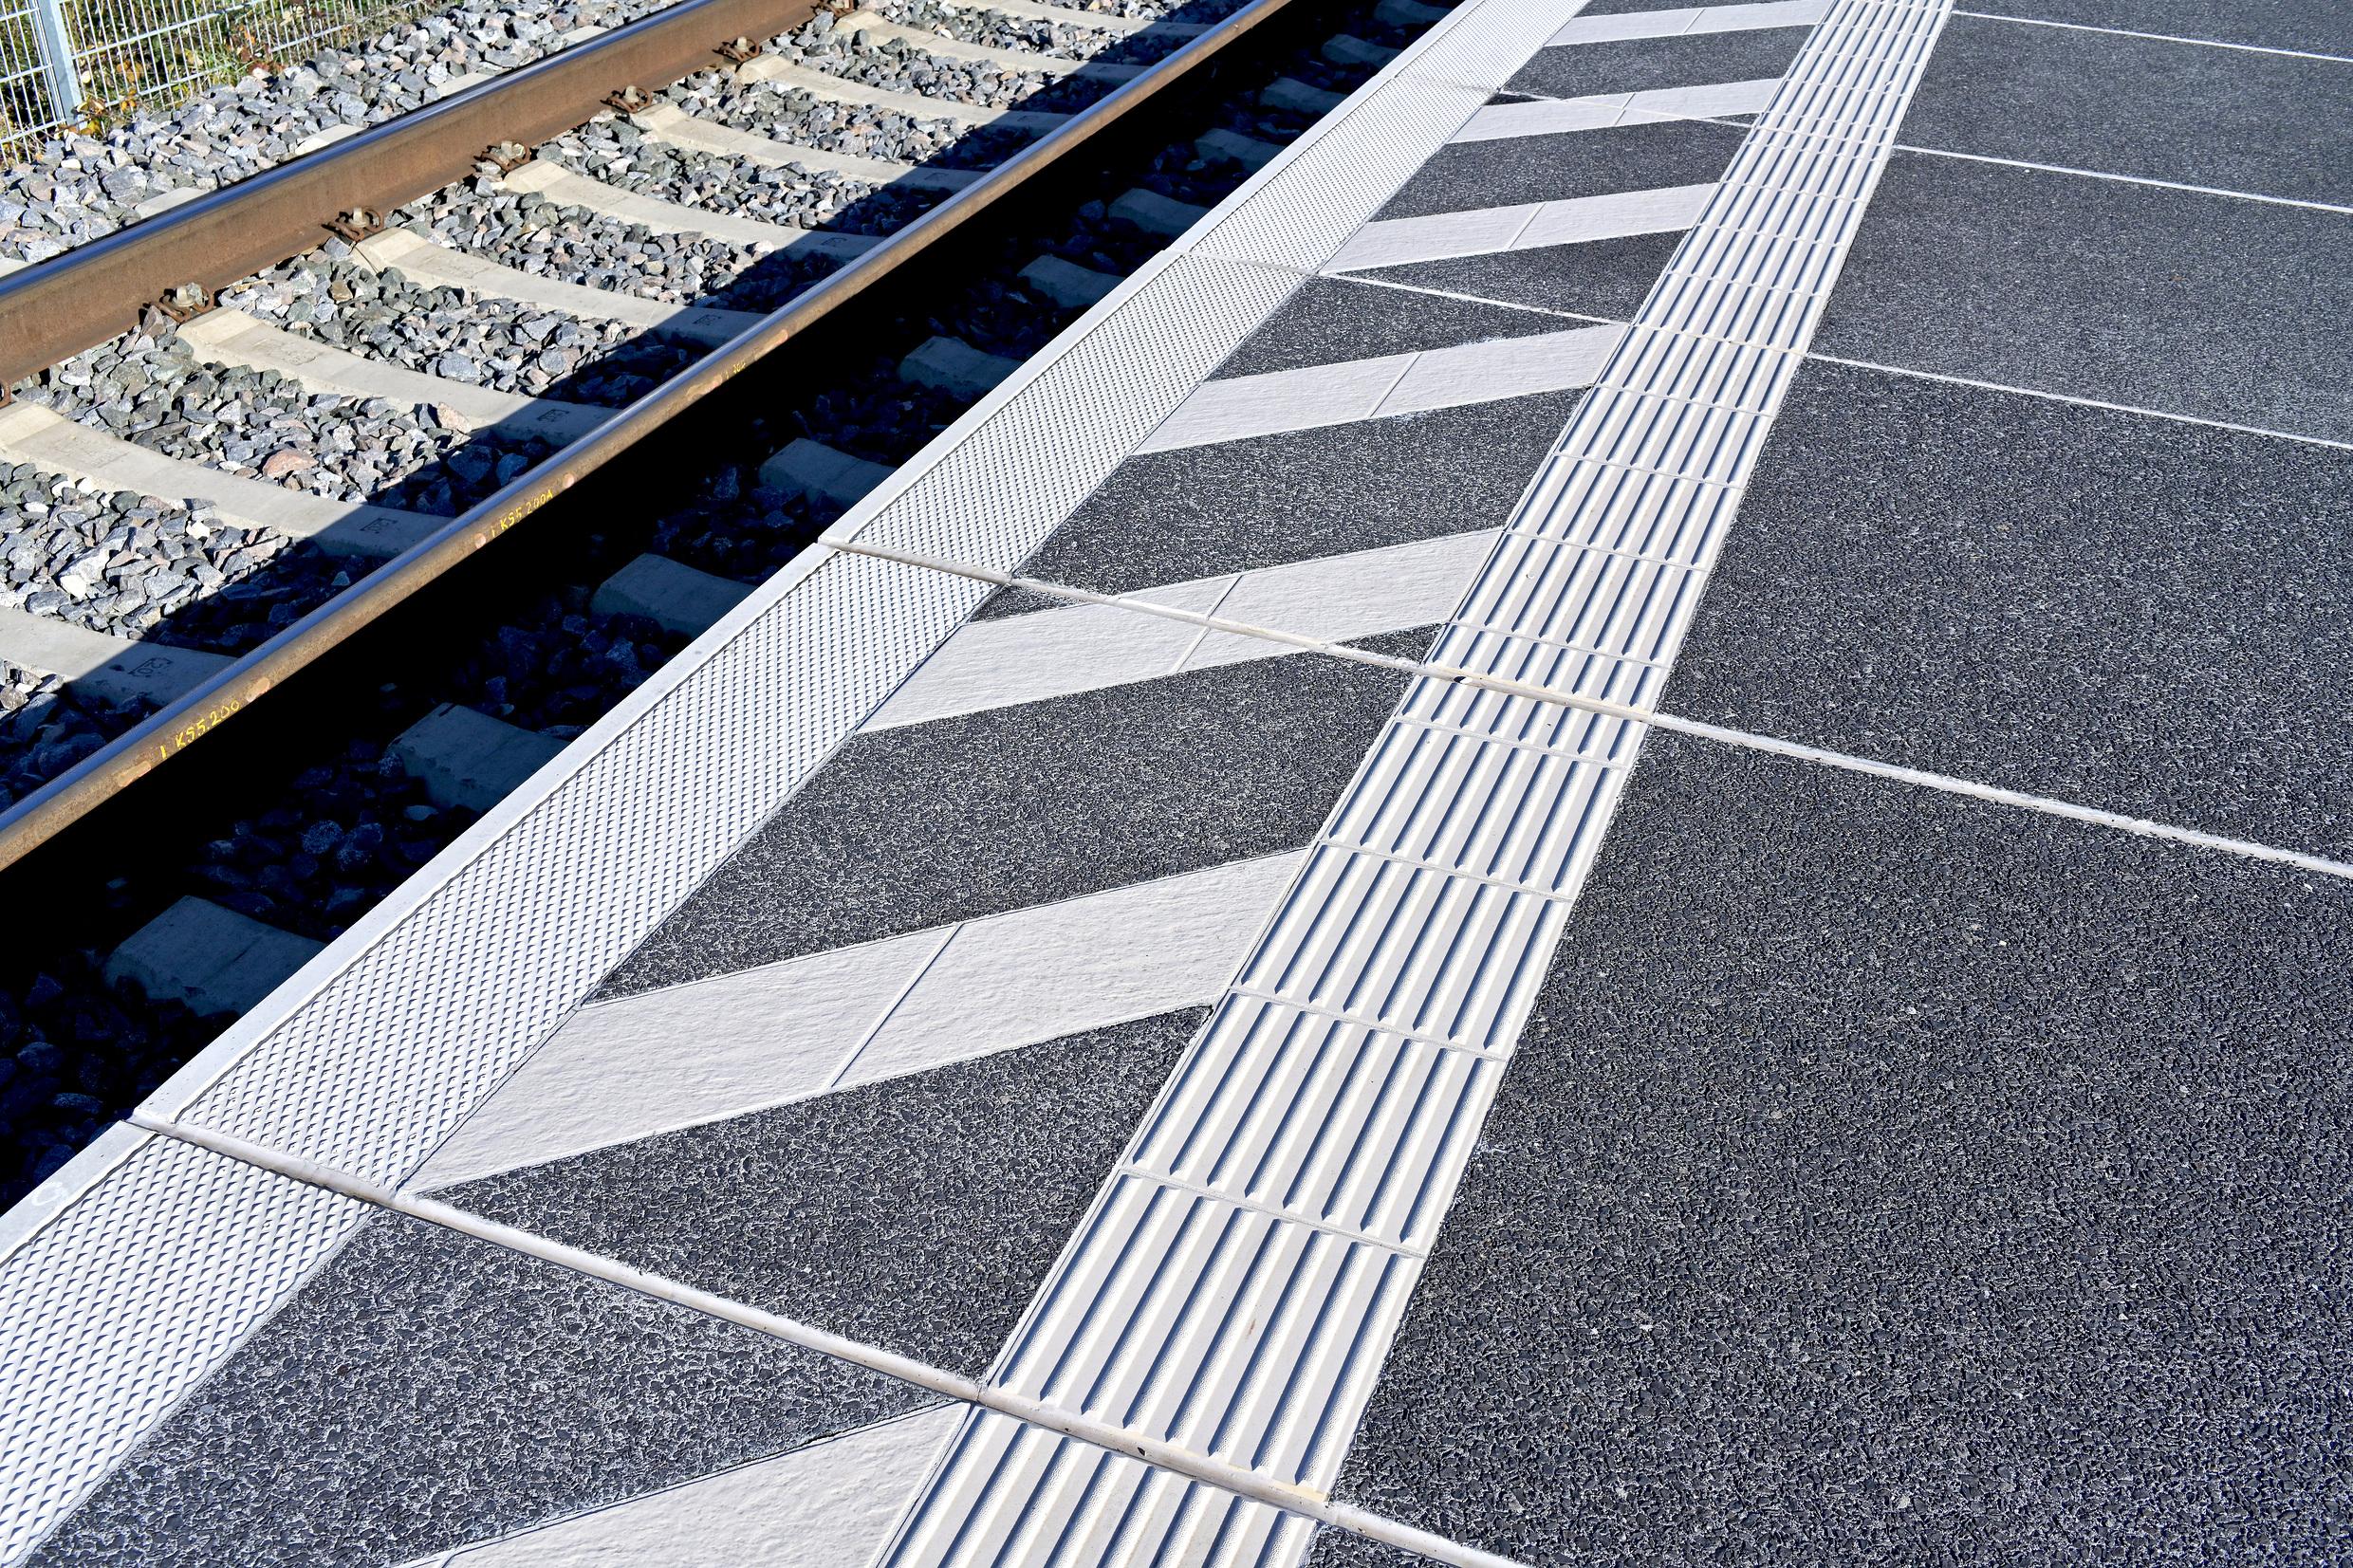 The guidance system for the blind on a platform with a track in the background.	